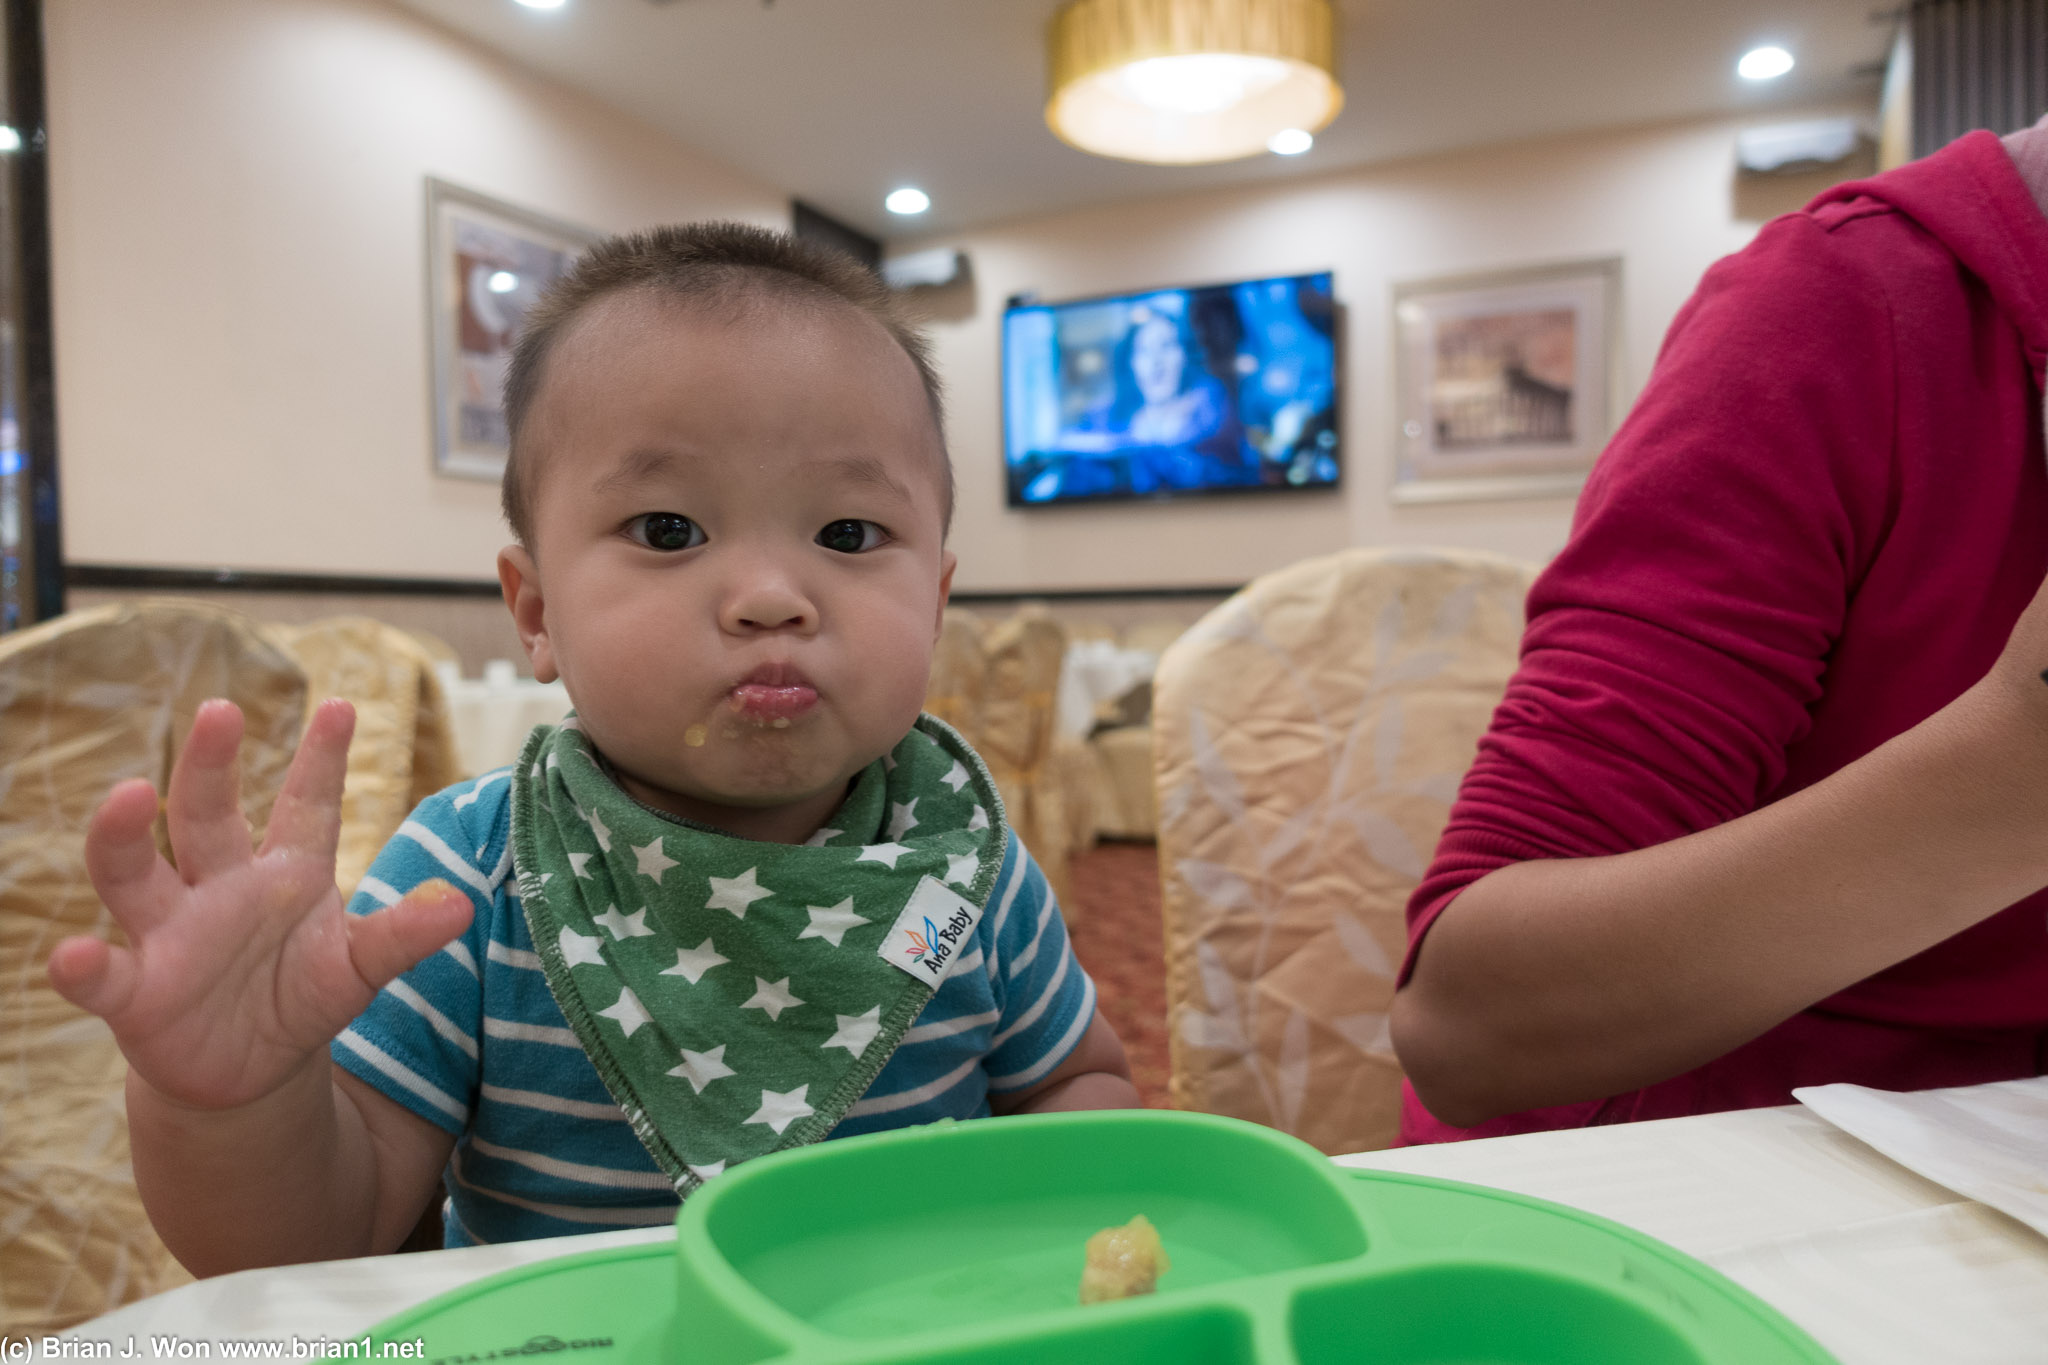 Someone getting his first (or one of his first) tastes of dim sum.